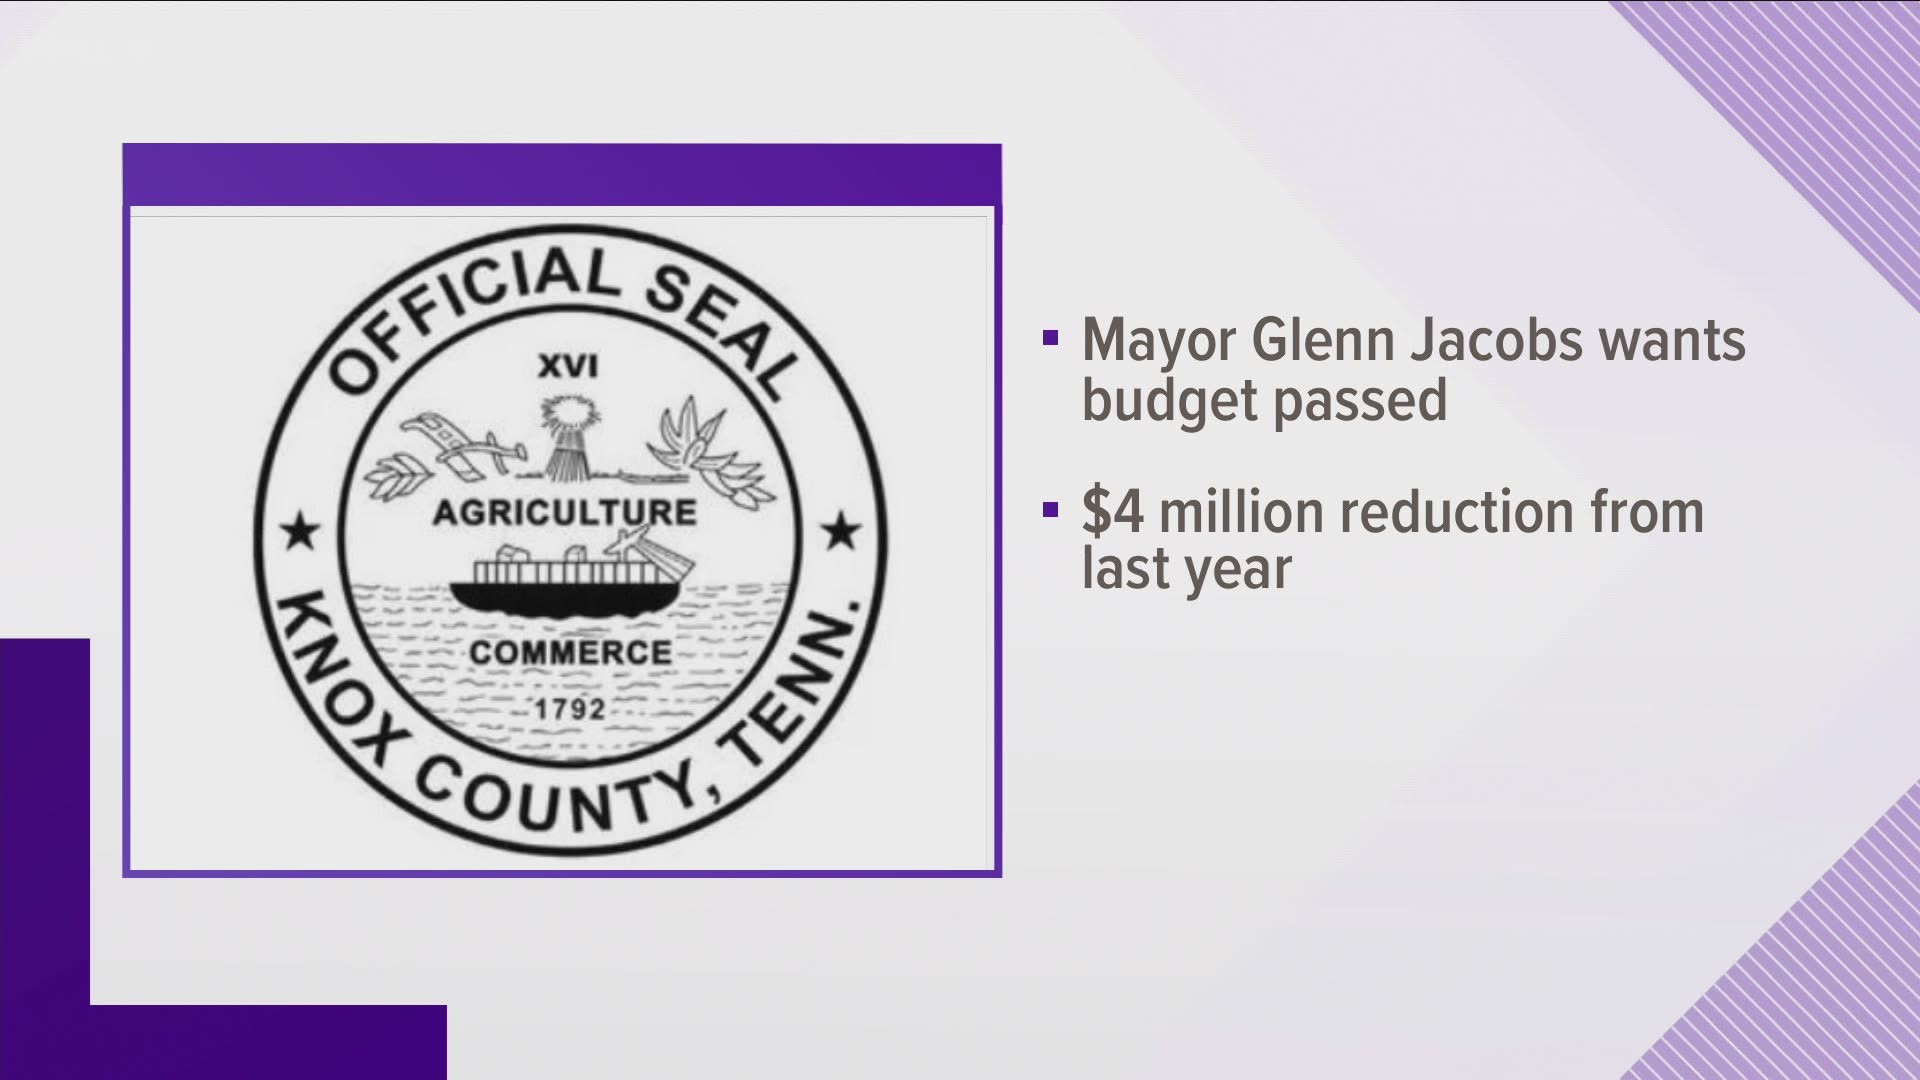 MAYOR GLENN JACOBS pitched a plan that cuts four million dollars from the budget last year to help cope with a drop in tax income due to the pandemic.